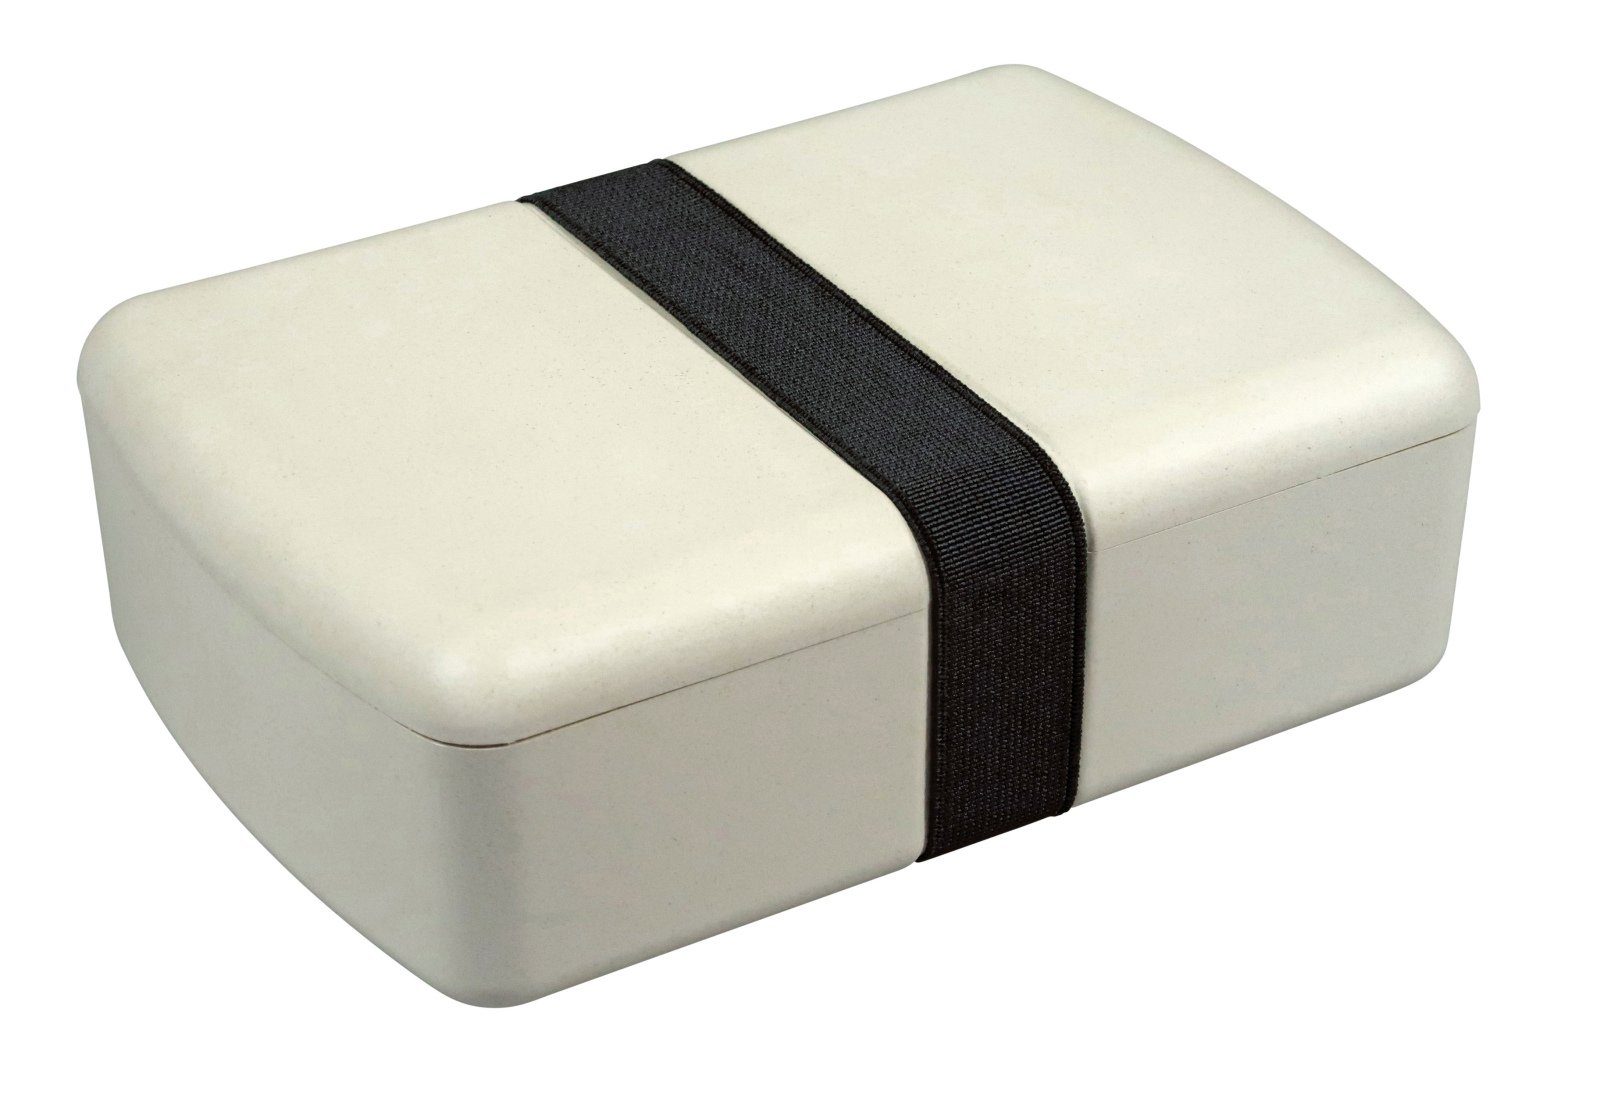 Capventure Lunchbox Zuperzozial Brotdose Coconut-white TIME-OUT-BOX